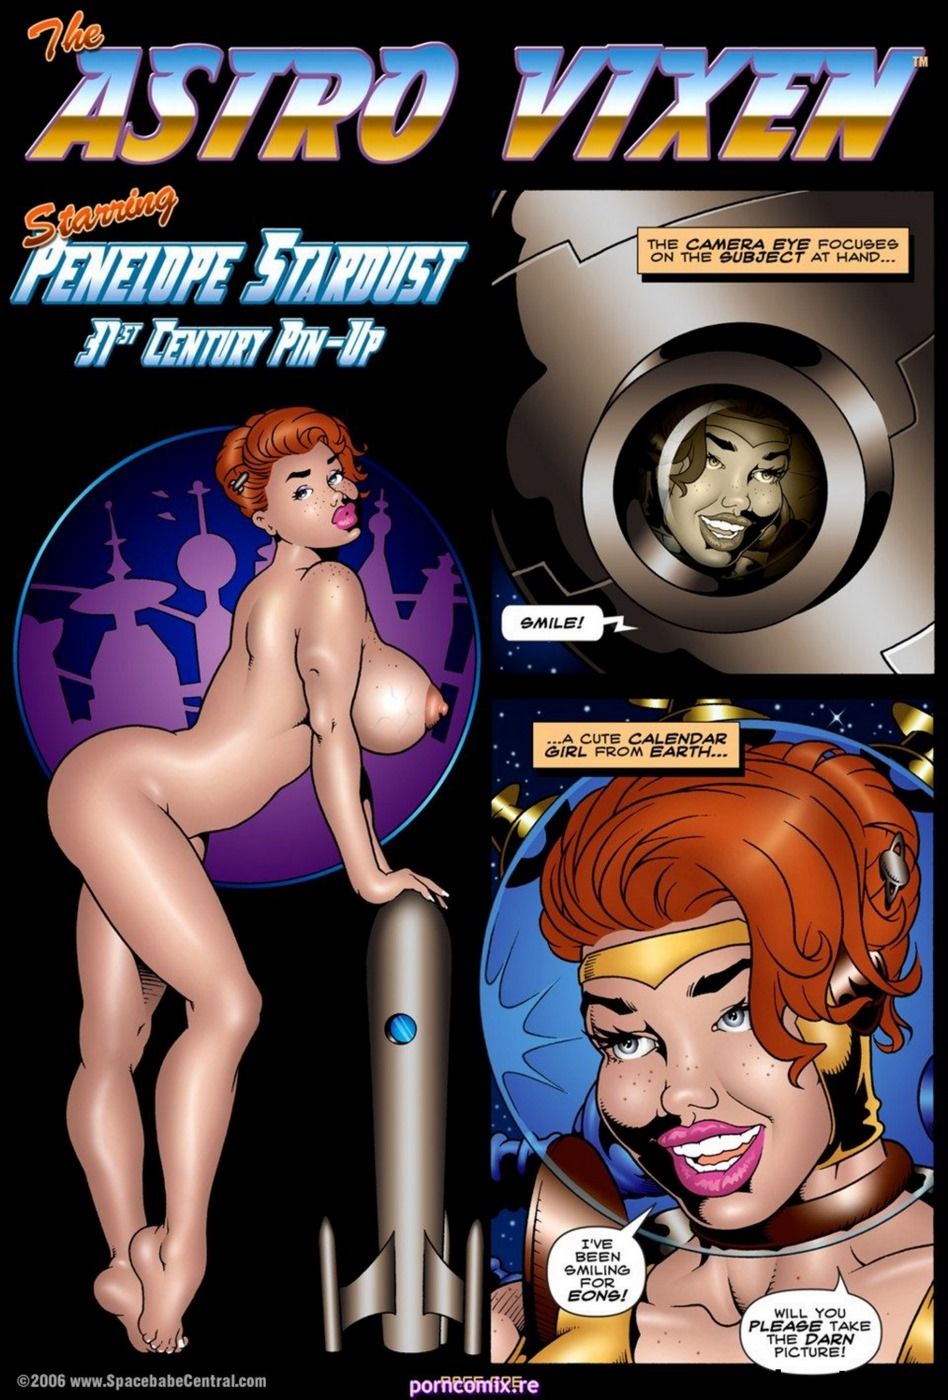 The Astro Vixen - James Lemay page 1